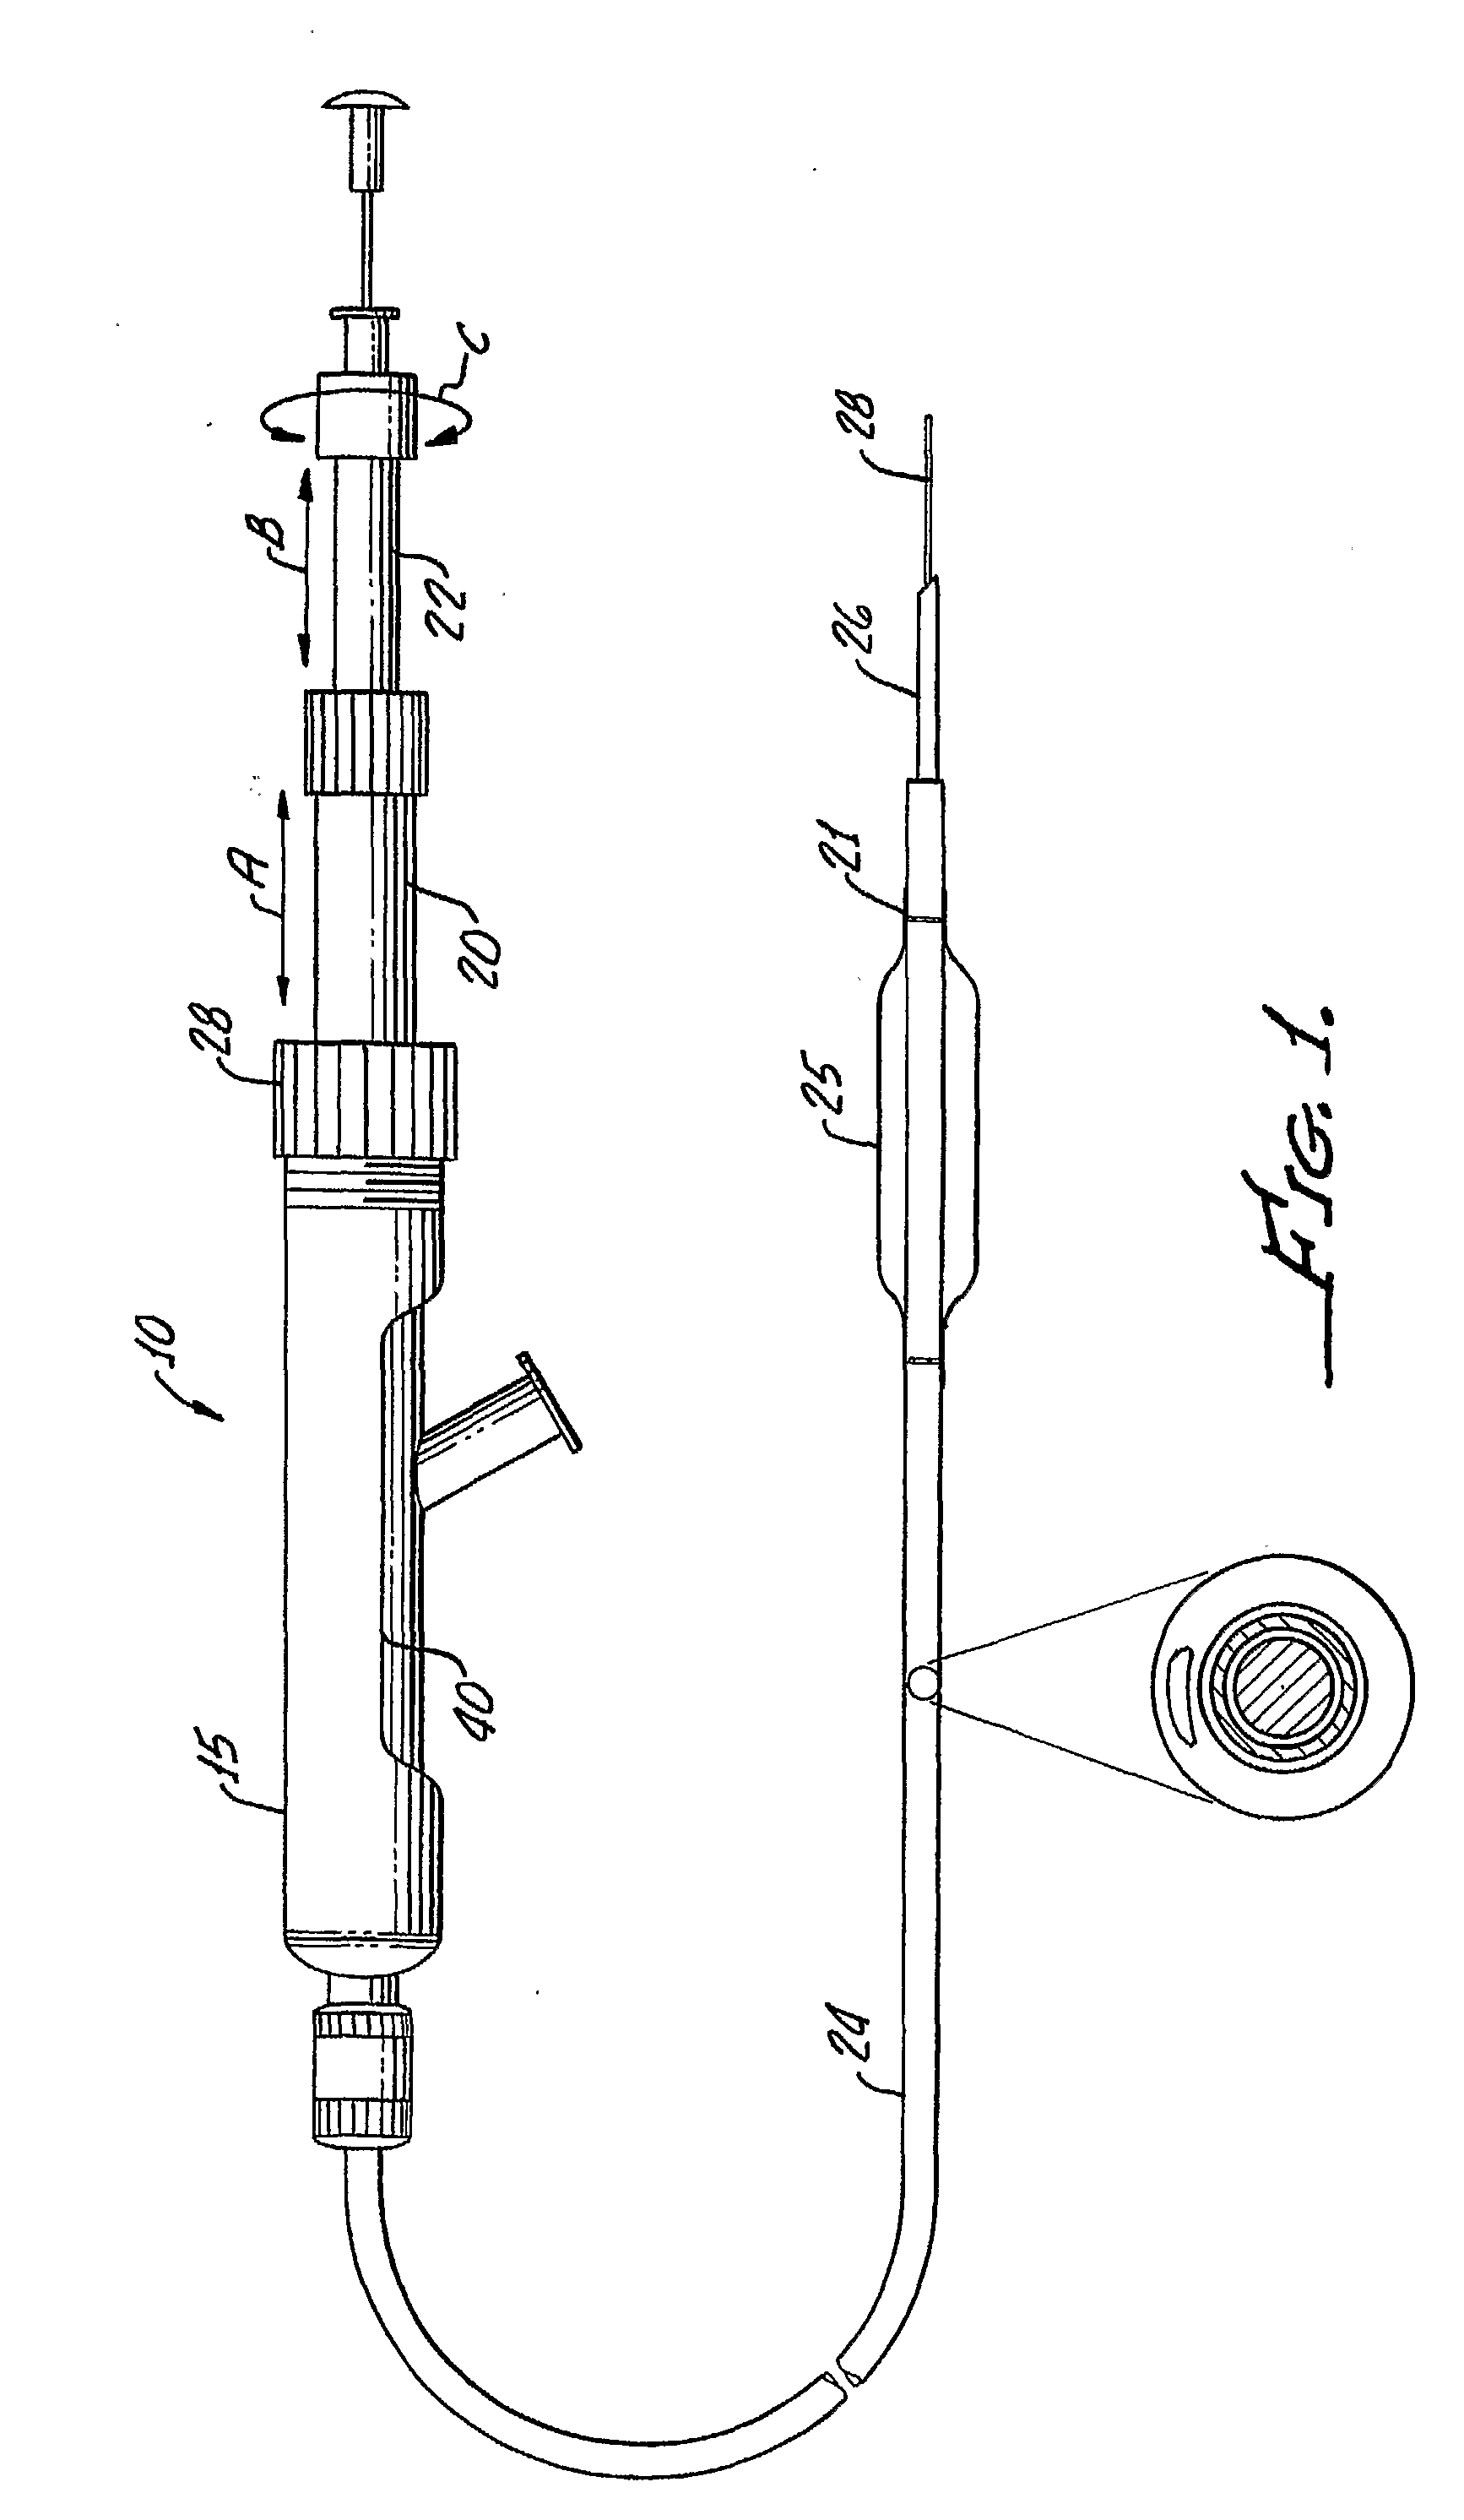 Method and Apparatus for Performing Needle Guided Interventions